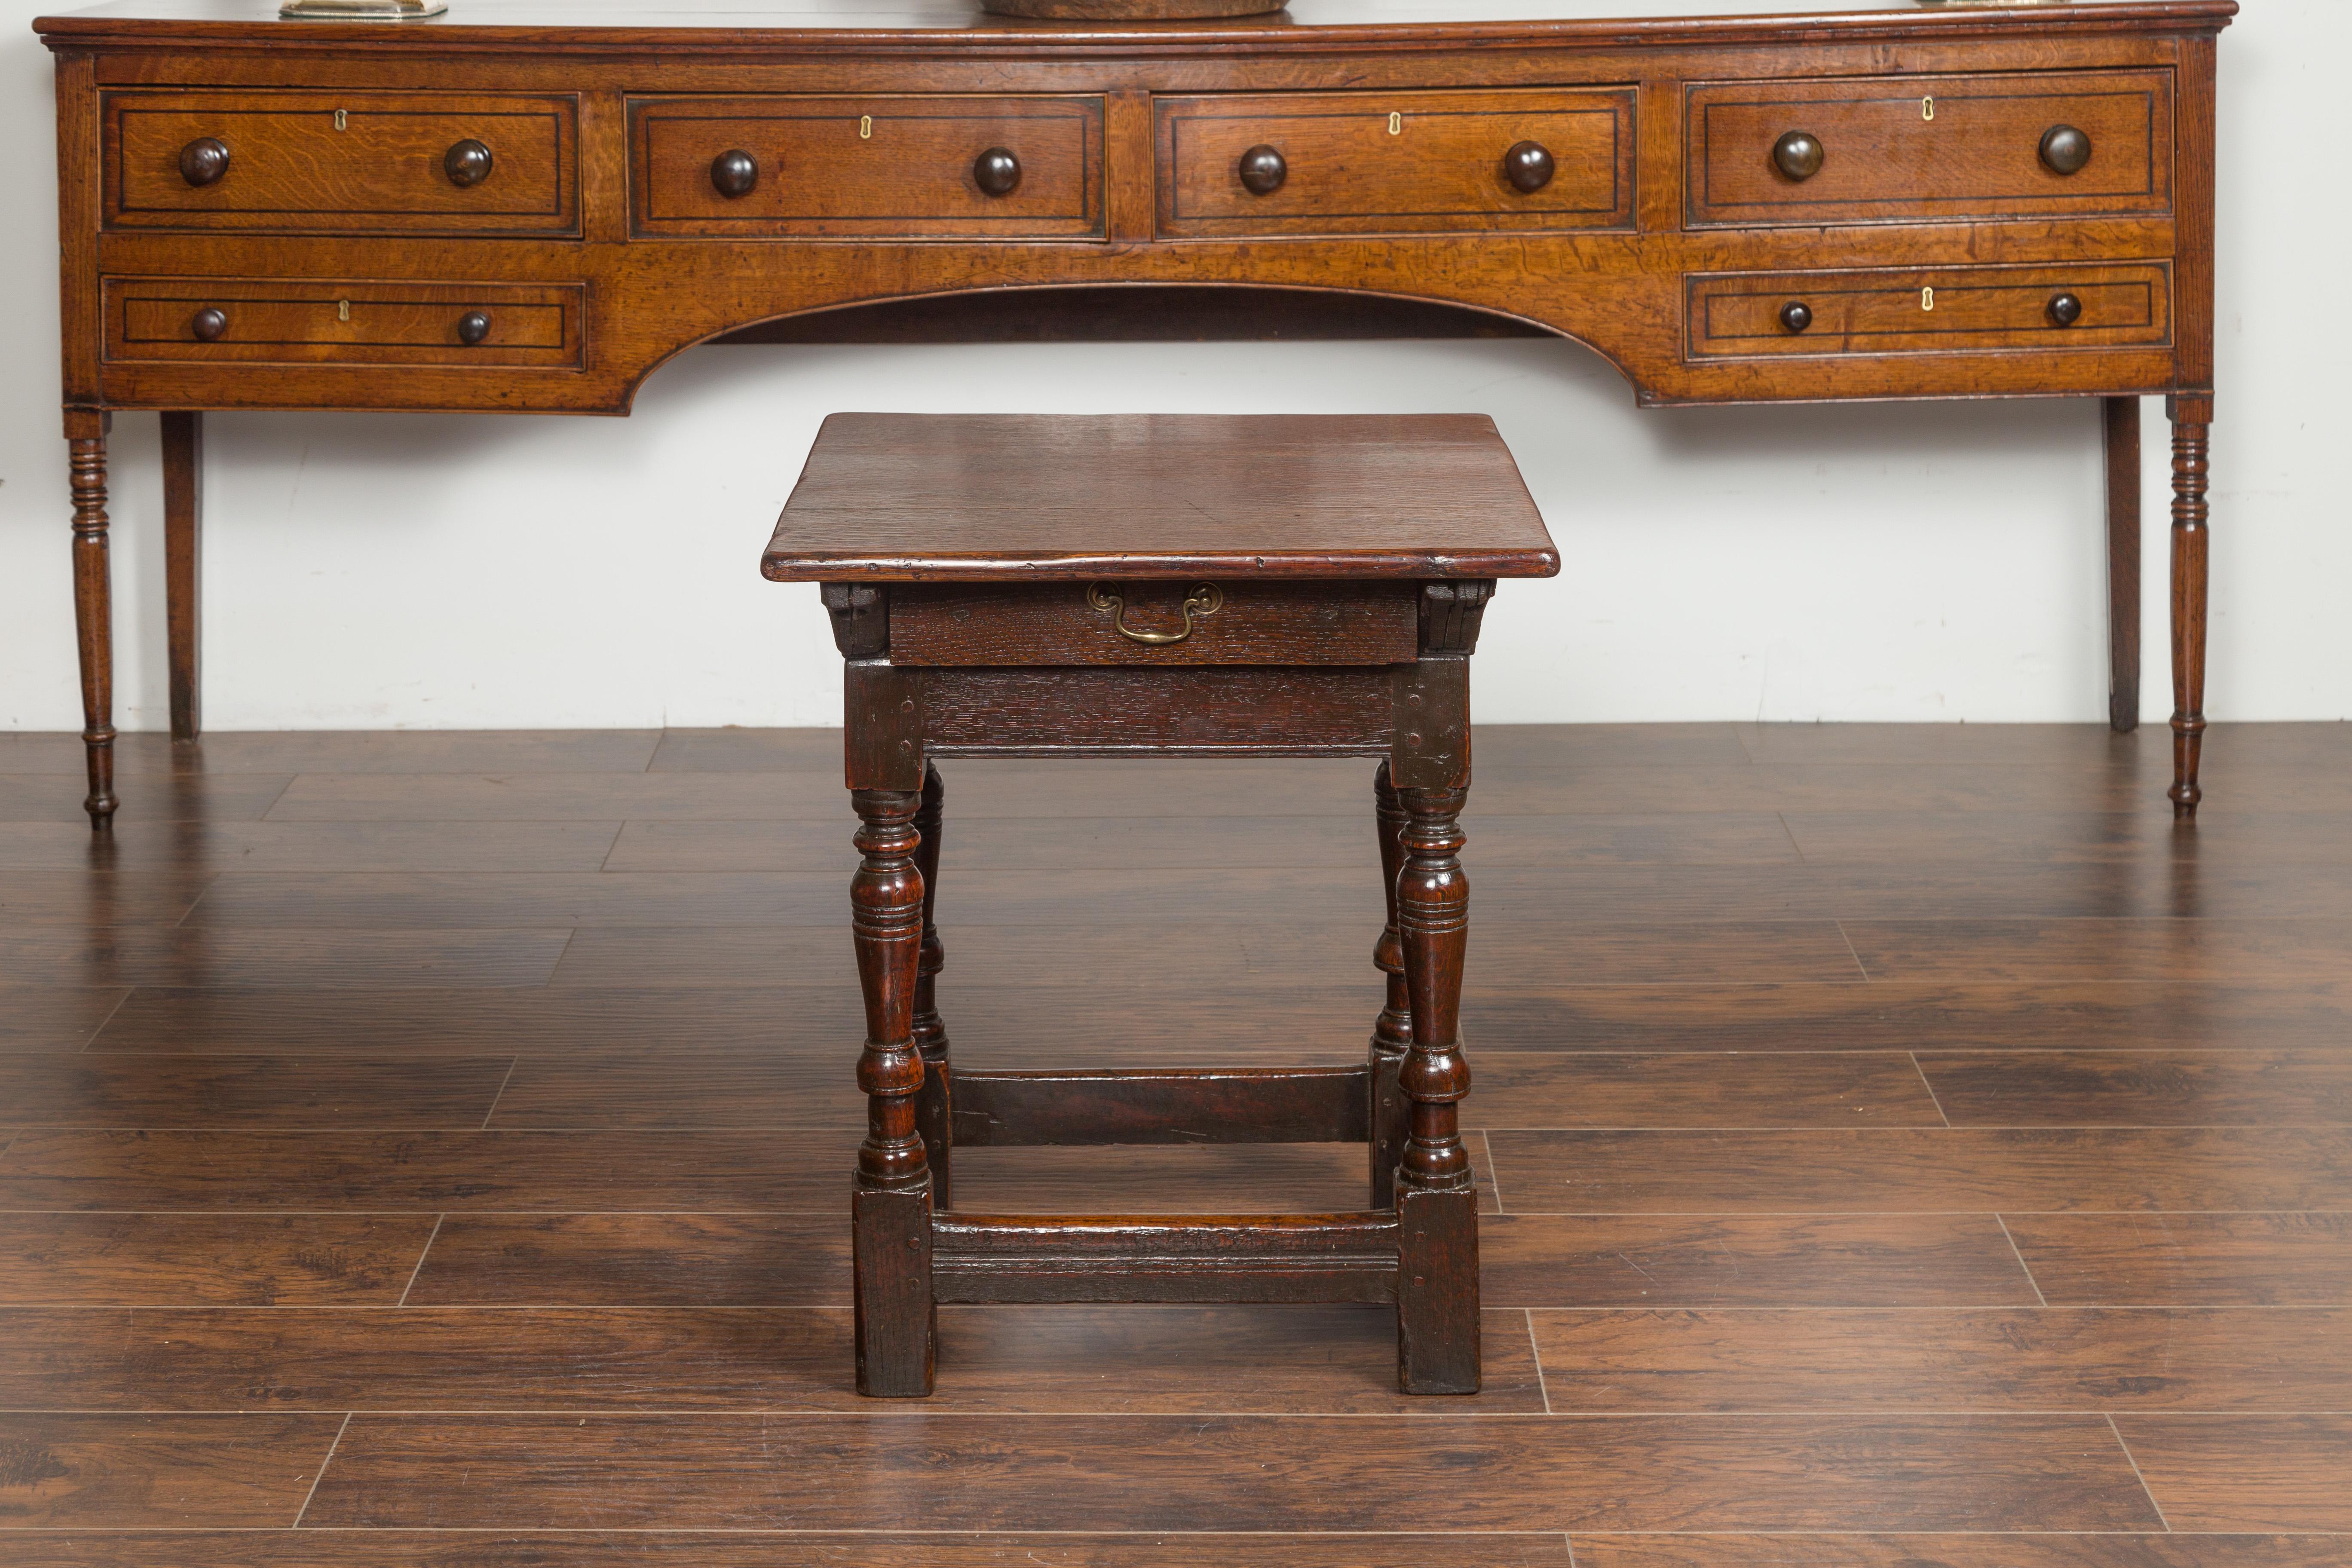 An English Georgian period oak side table from the early 19th century, with single drawer, turned legs and stretchers. Born in England during the early years of the 19th century, this oak side table features a square top sitting above a single